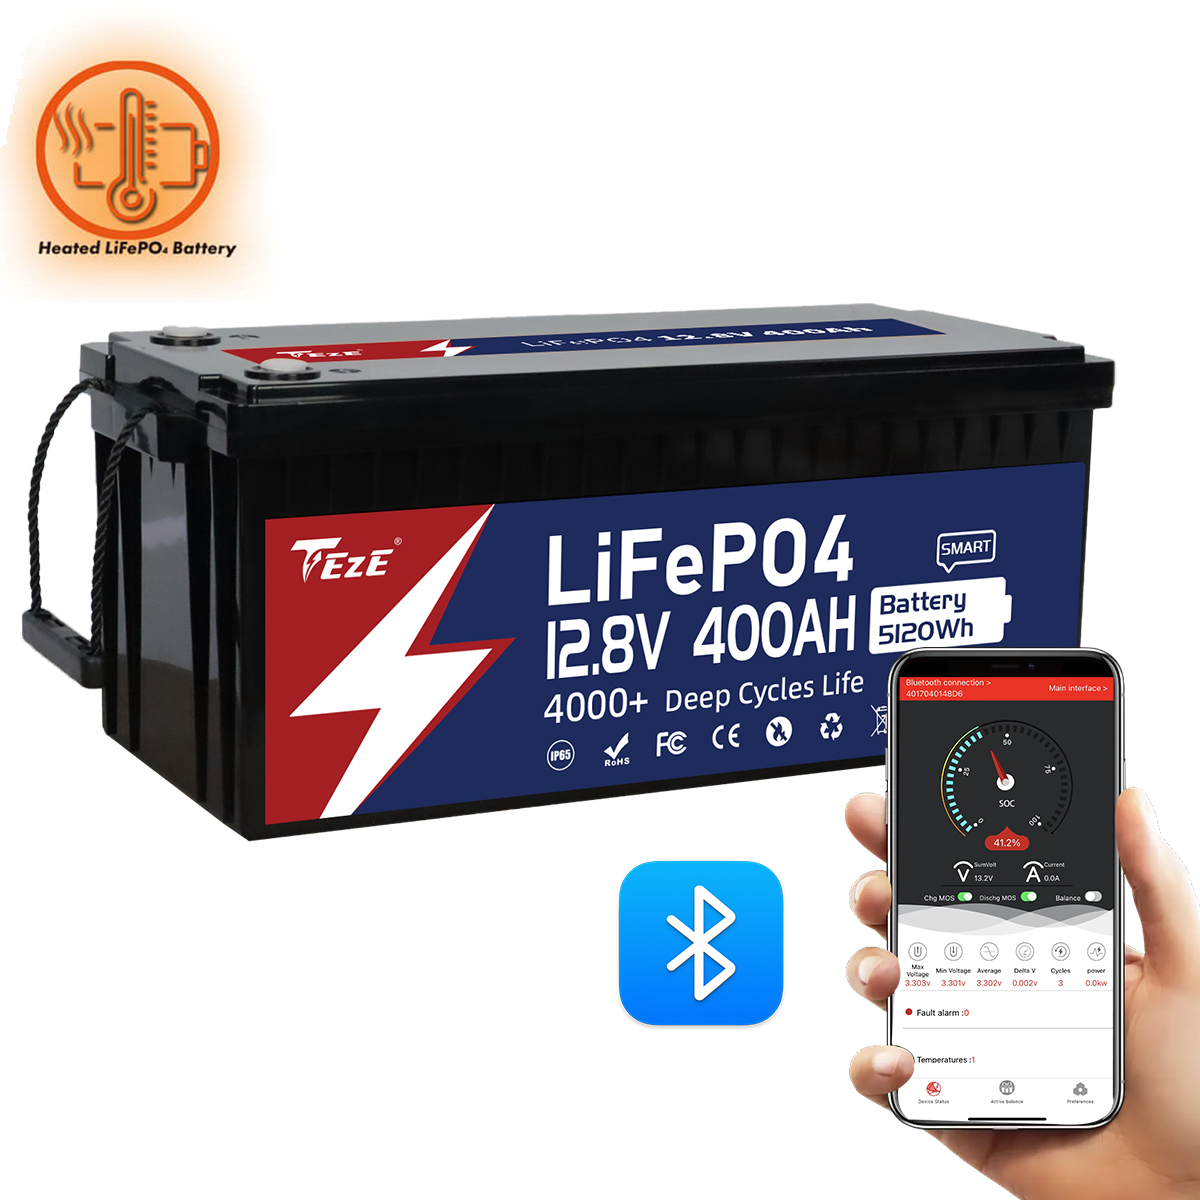 TezePower 12V 400Ah LiFePO4 Battery with Bluetooth, Self-heating and Active Balancer, Built-in 250A Daly BMS(Bluetooth Built-in Version)